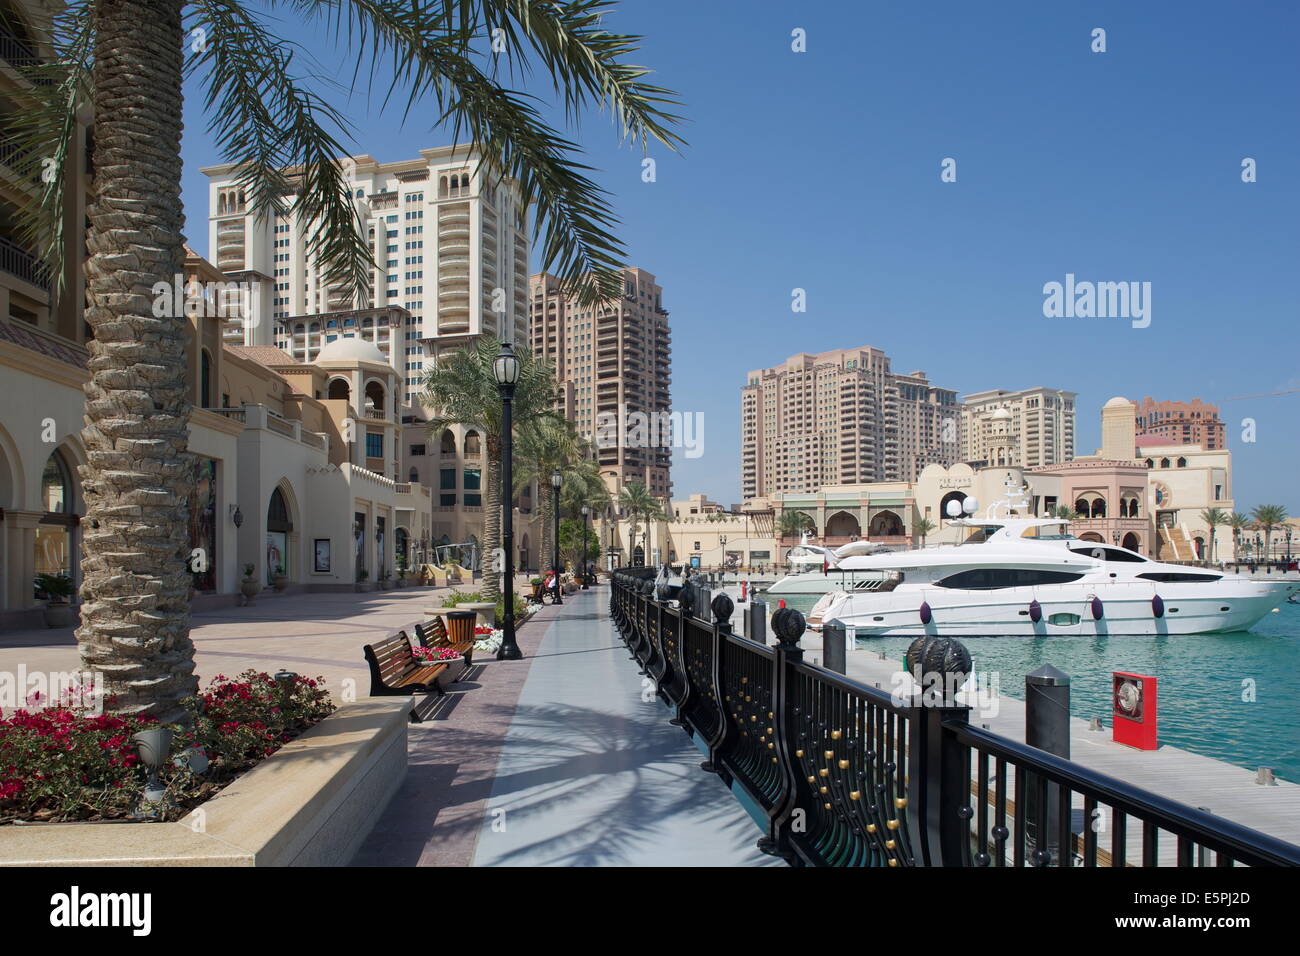 Waterside and Harbour, The Pearl, Doha, Qatar, Middle East Stock Photo